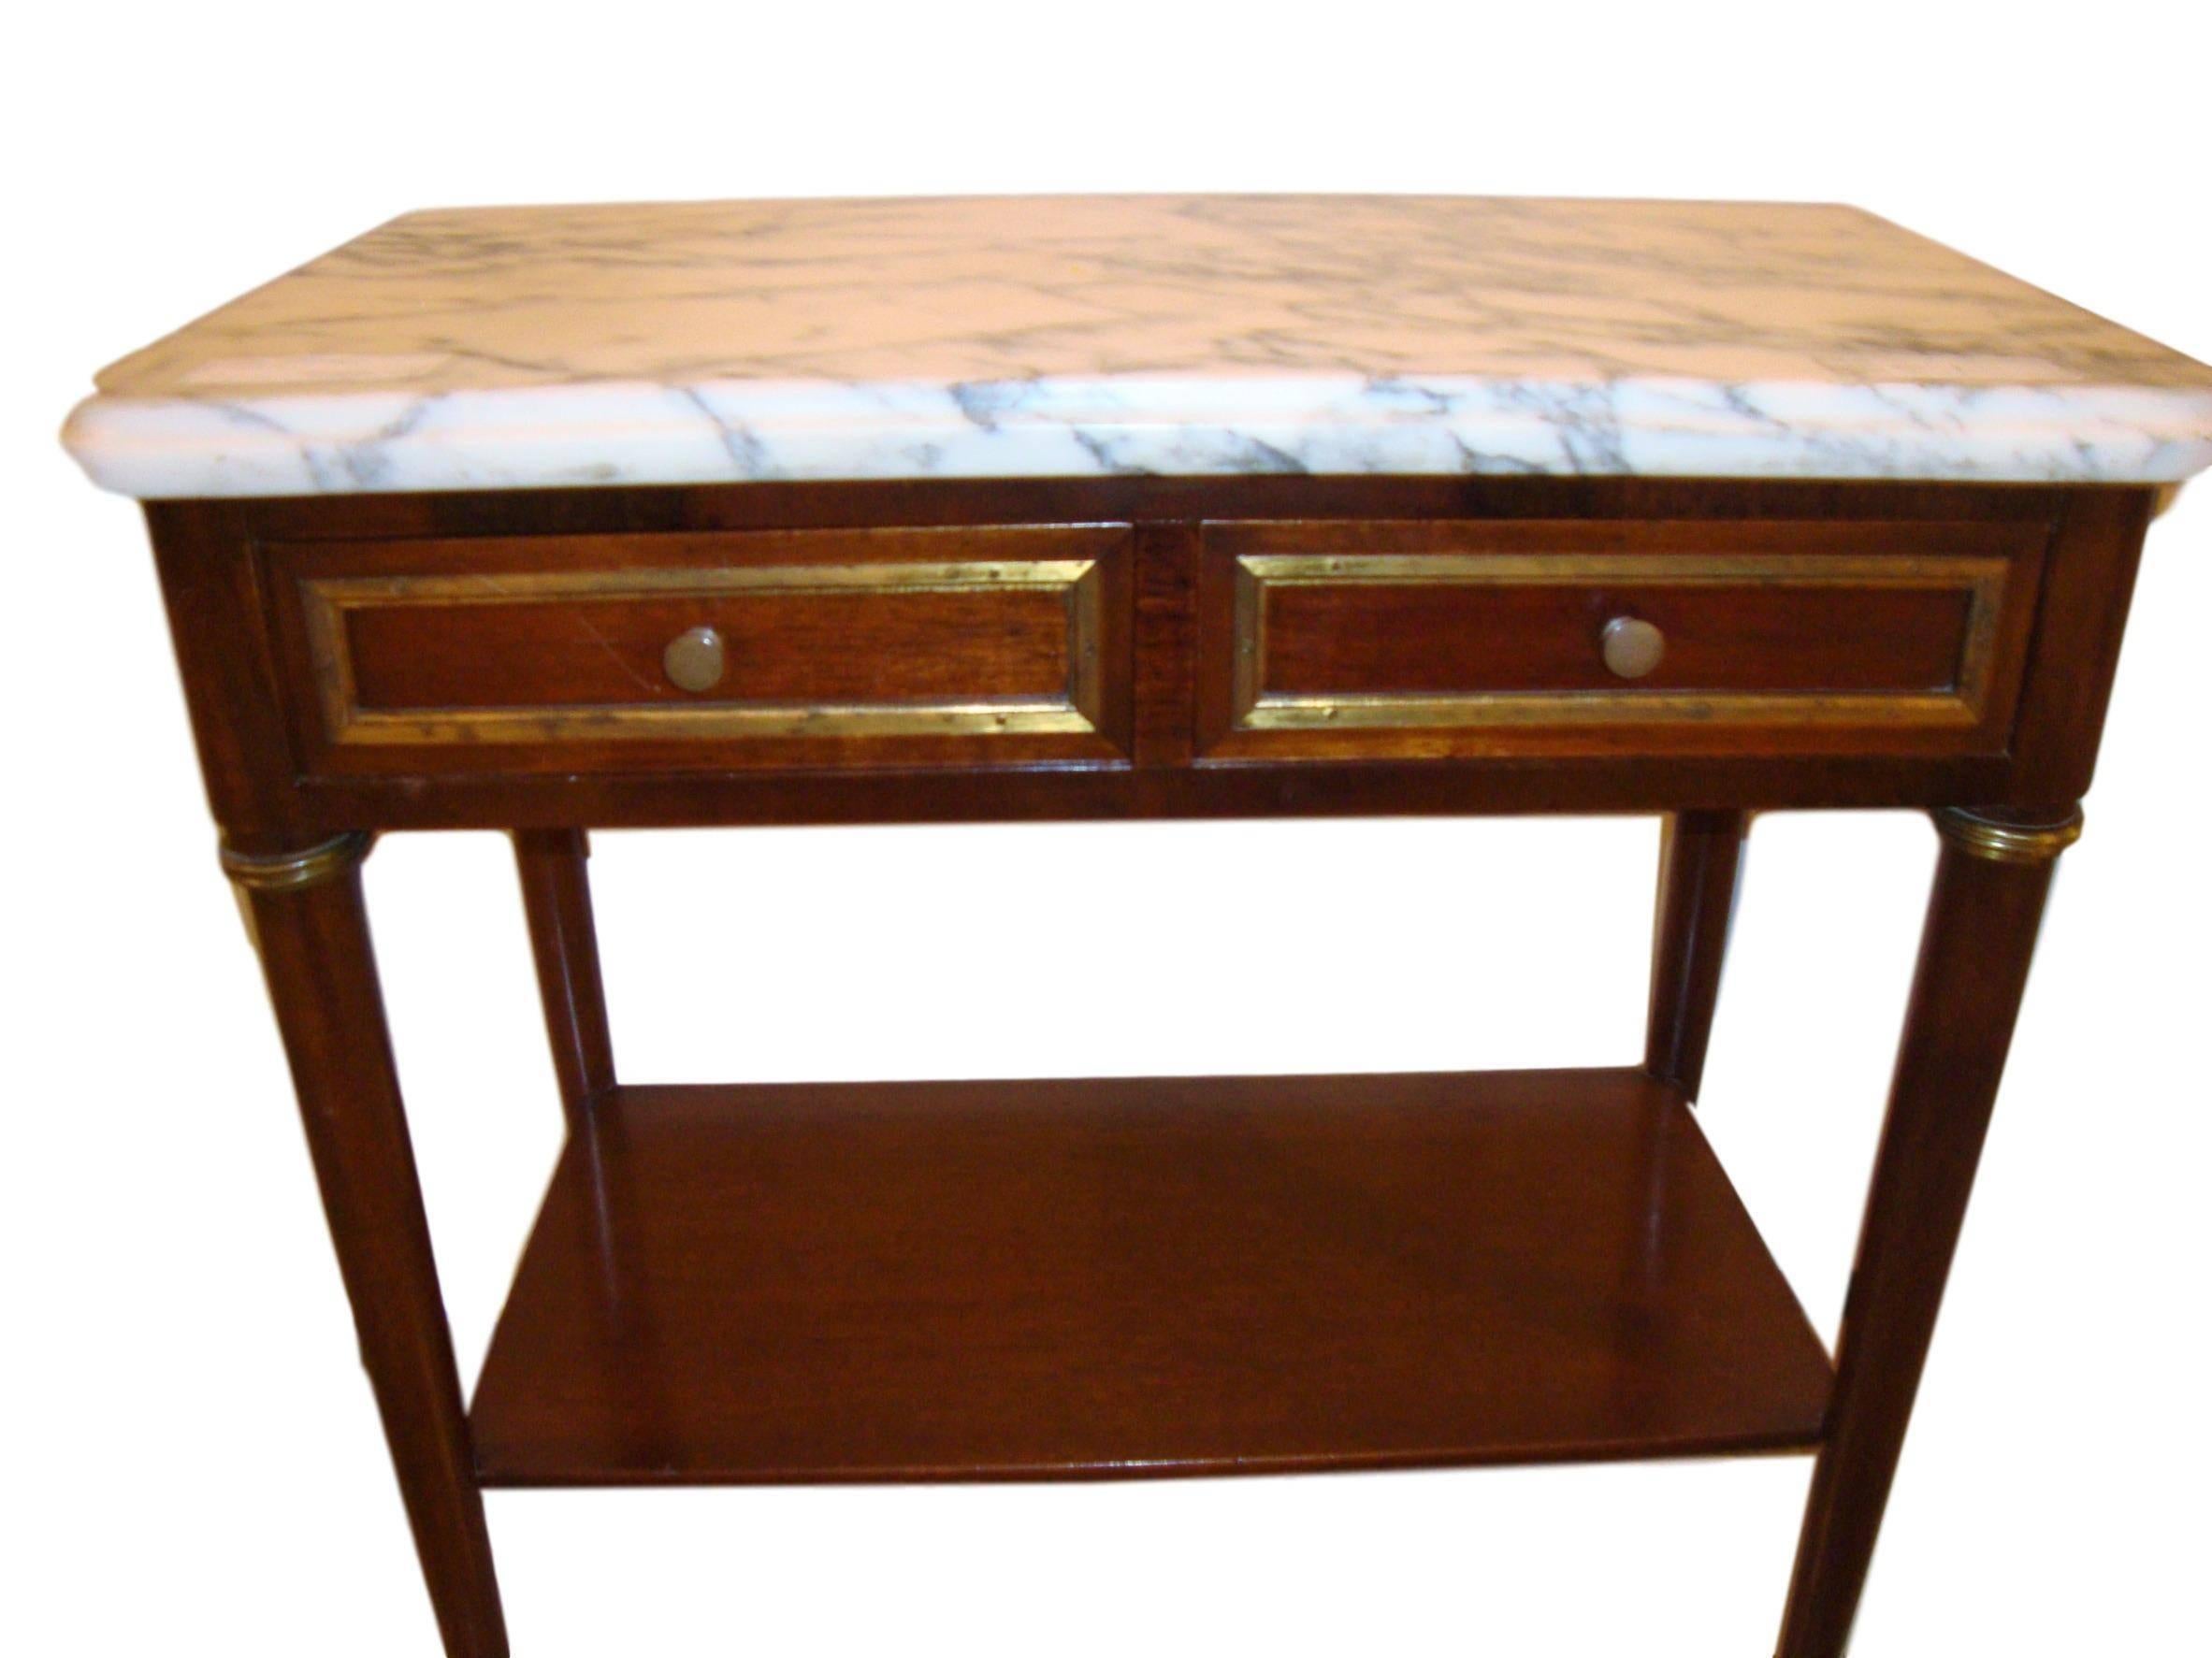 Diminutive mahogany marble top end table or stand manner Jansen. A Louis XVI style end table or stand with a white marble top and two drawers. 

Drawer length - 11inches